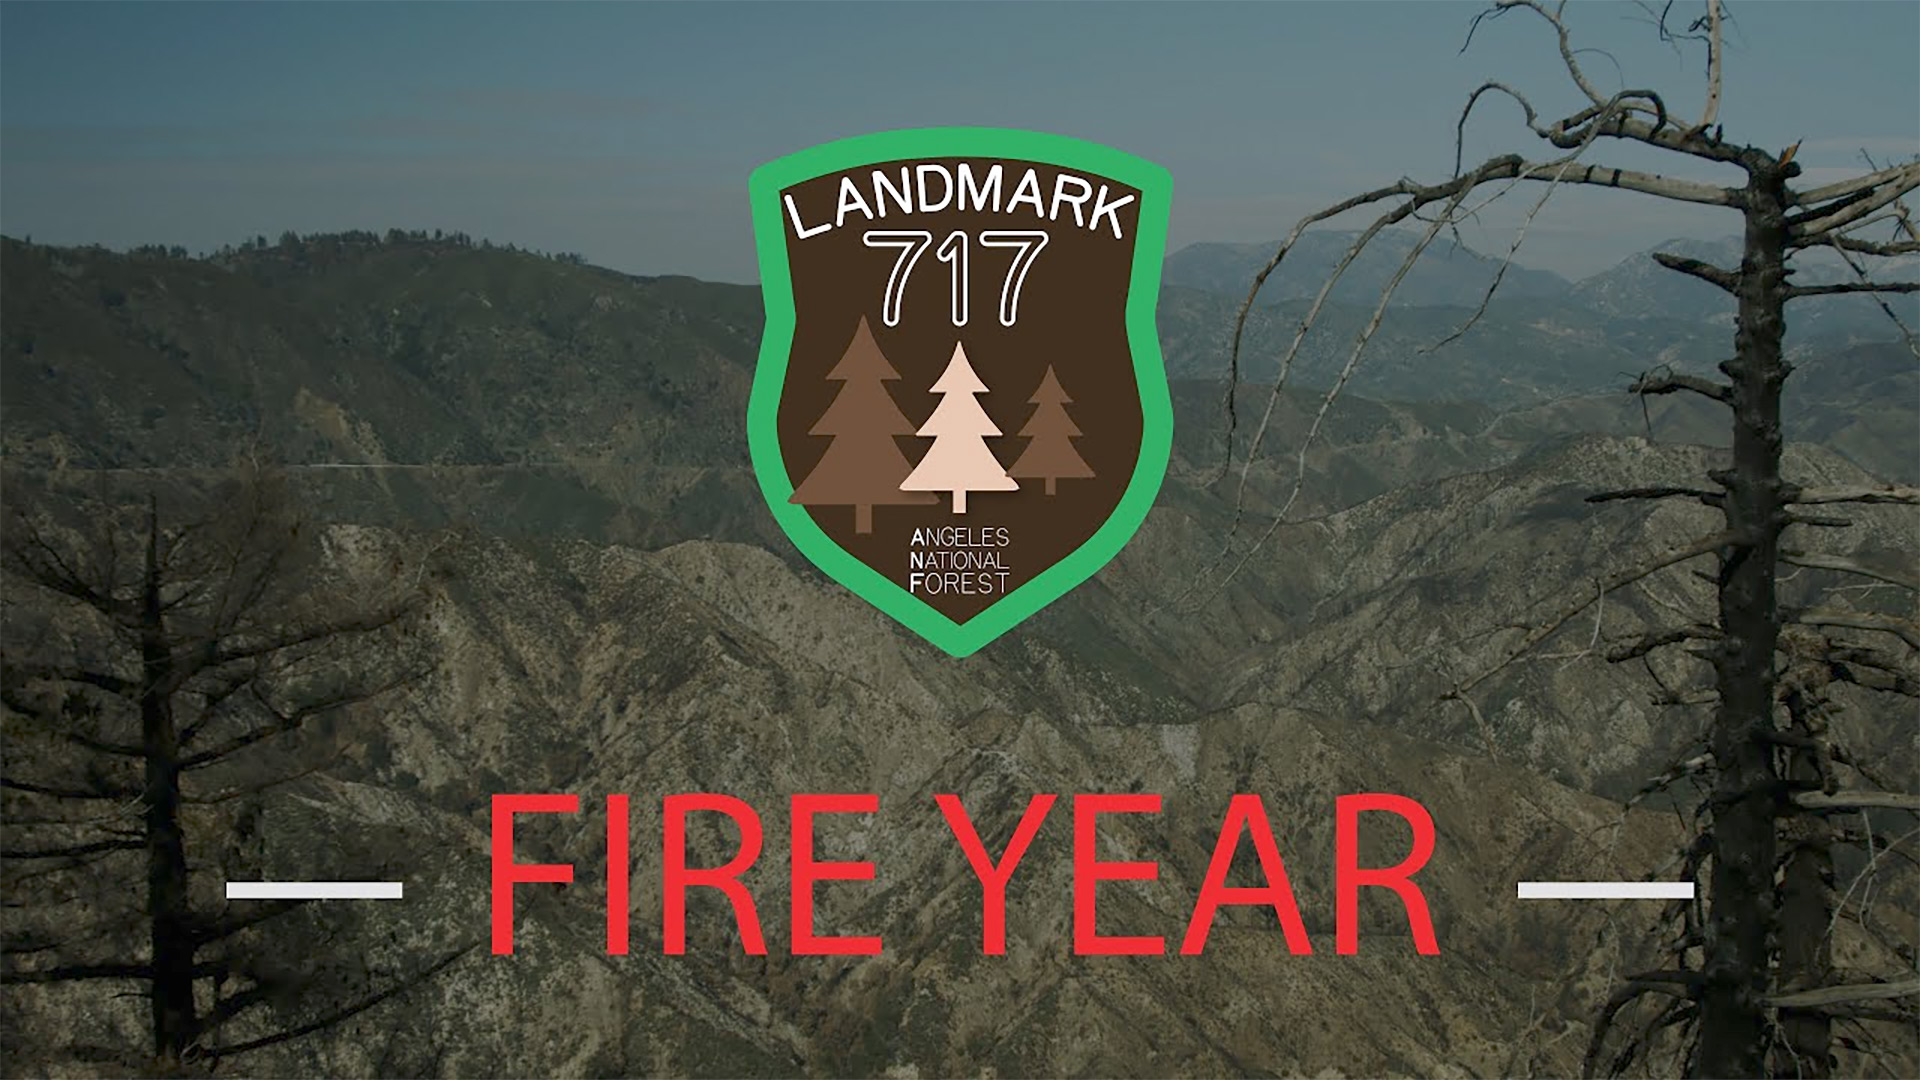 Fire Year, First Full-Length Episode, Out Now